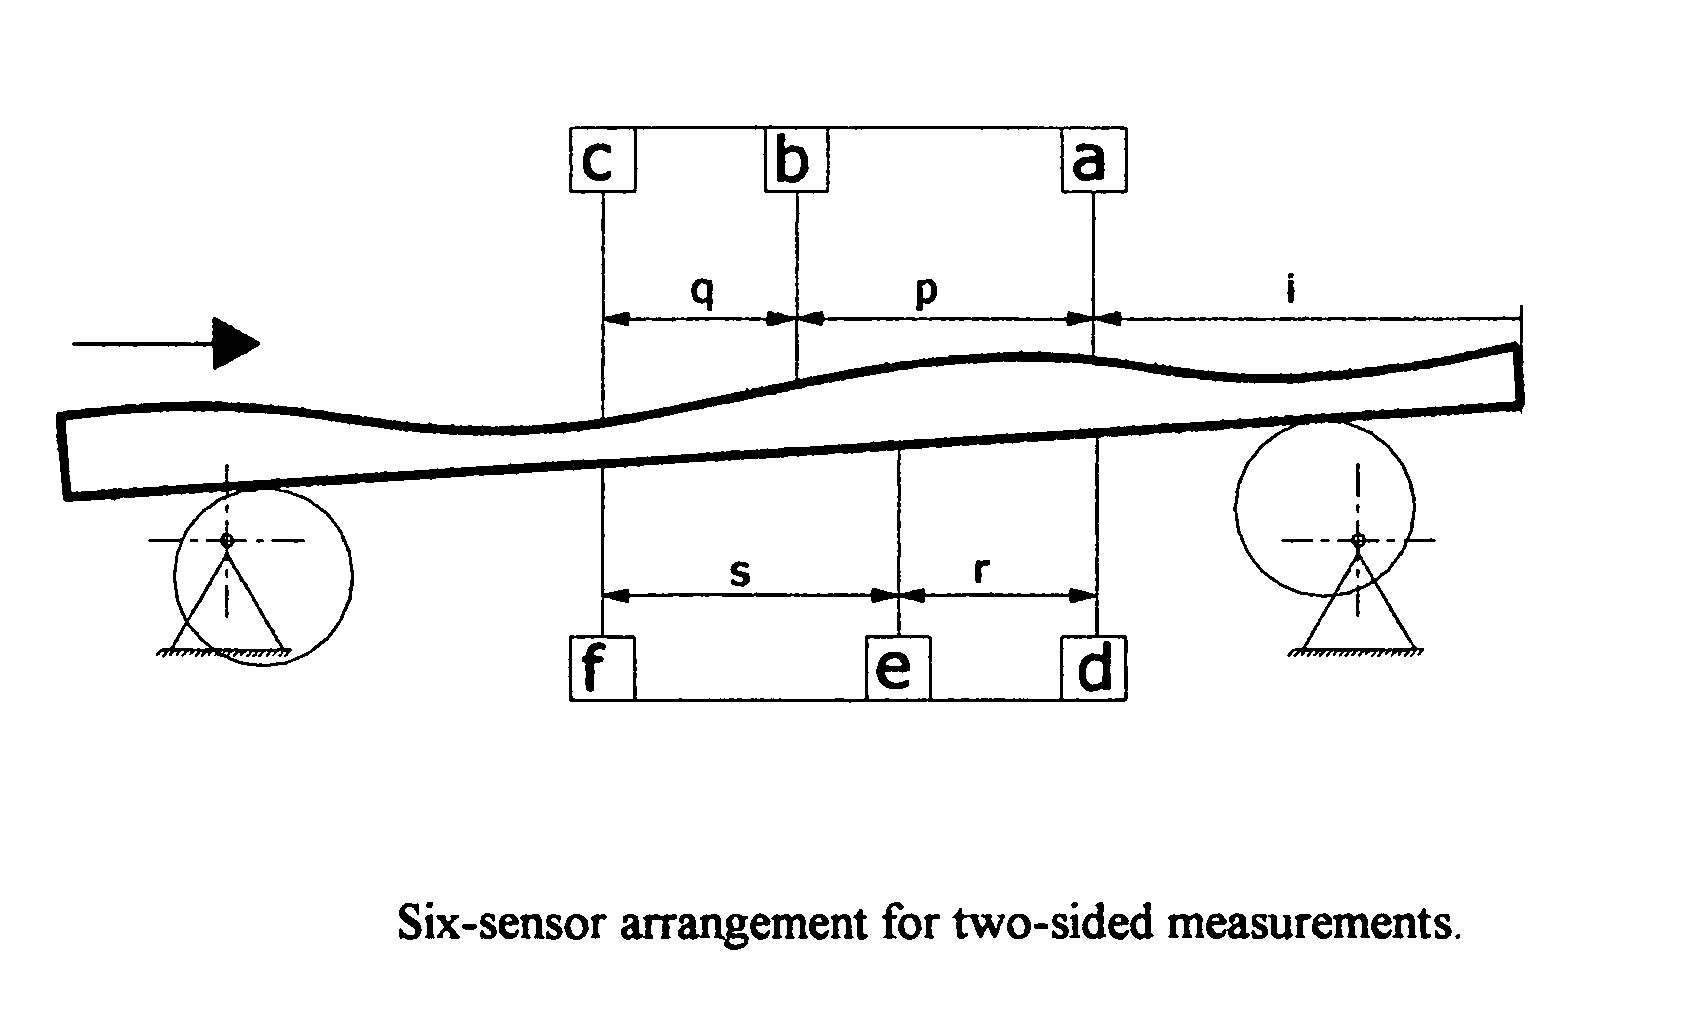 Surface profile measurement, independent of relative motions